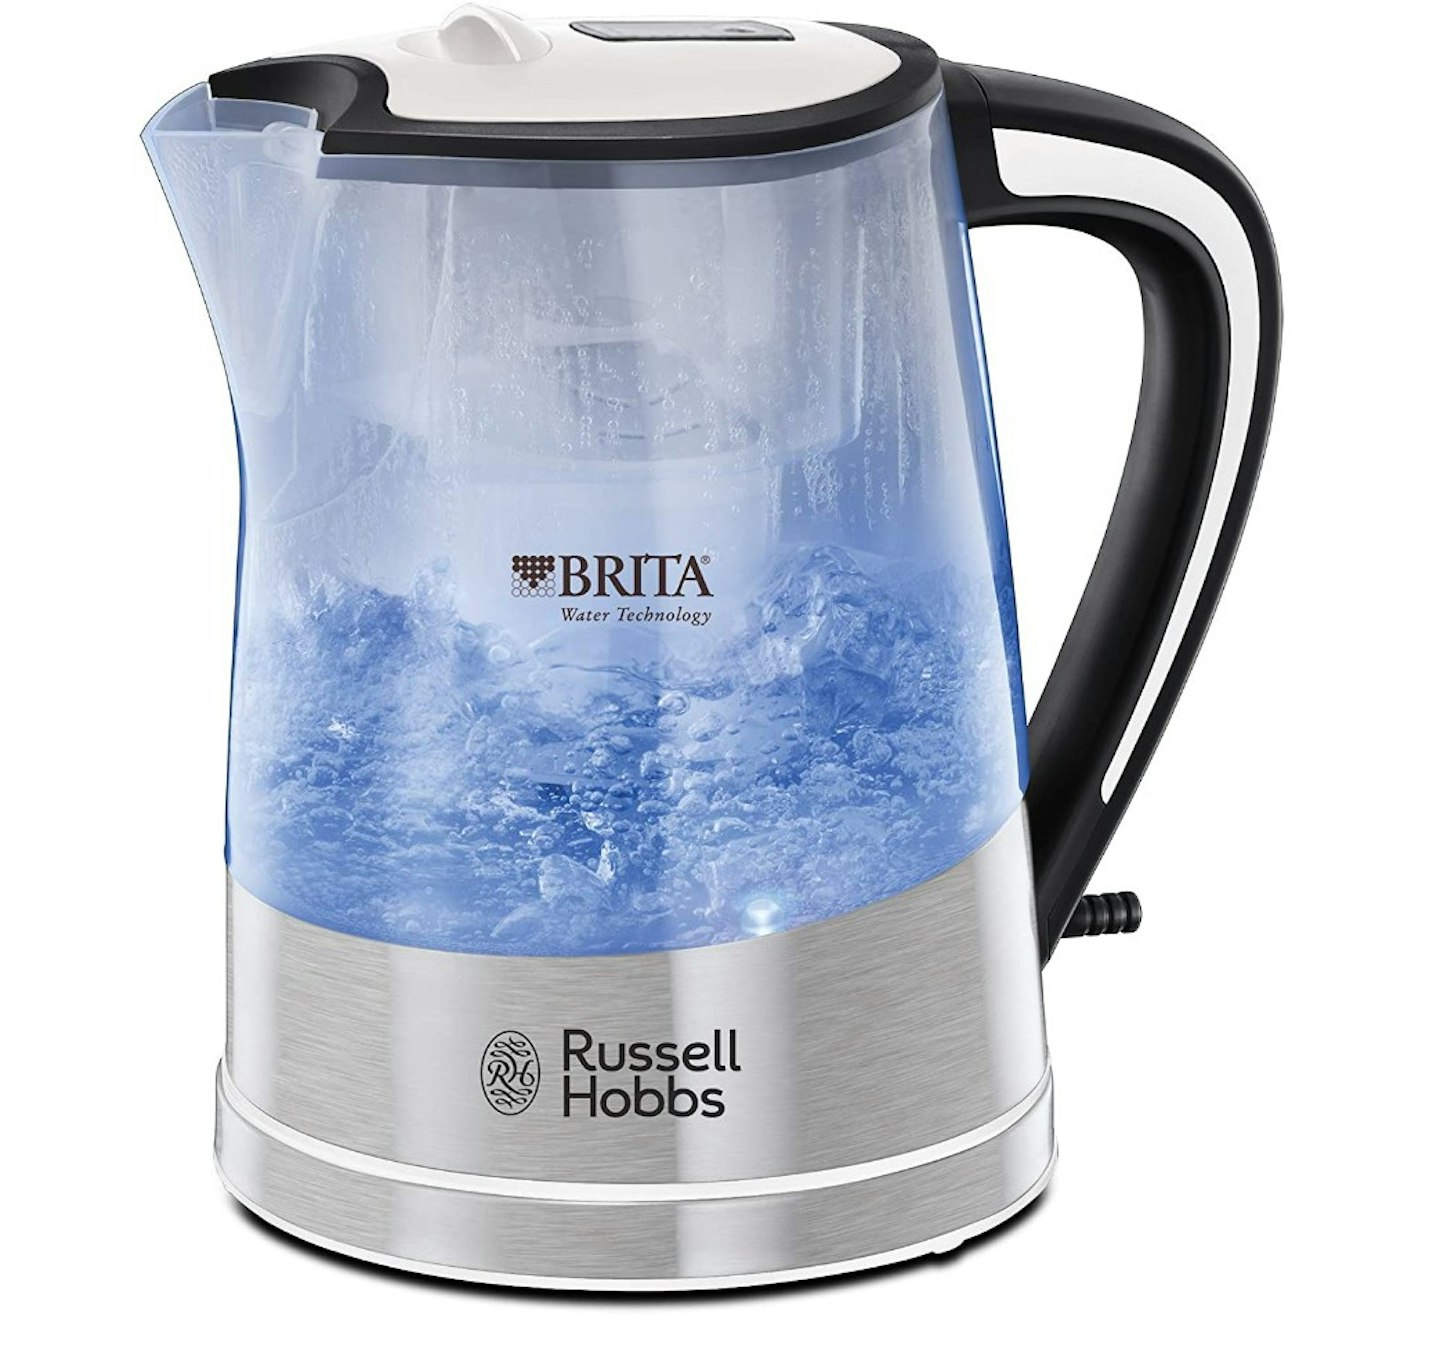  Russell Hobbs 22851 Brita Filter Purity Electric Kettle,